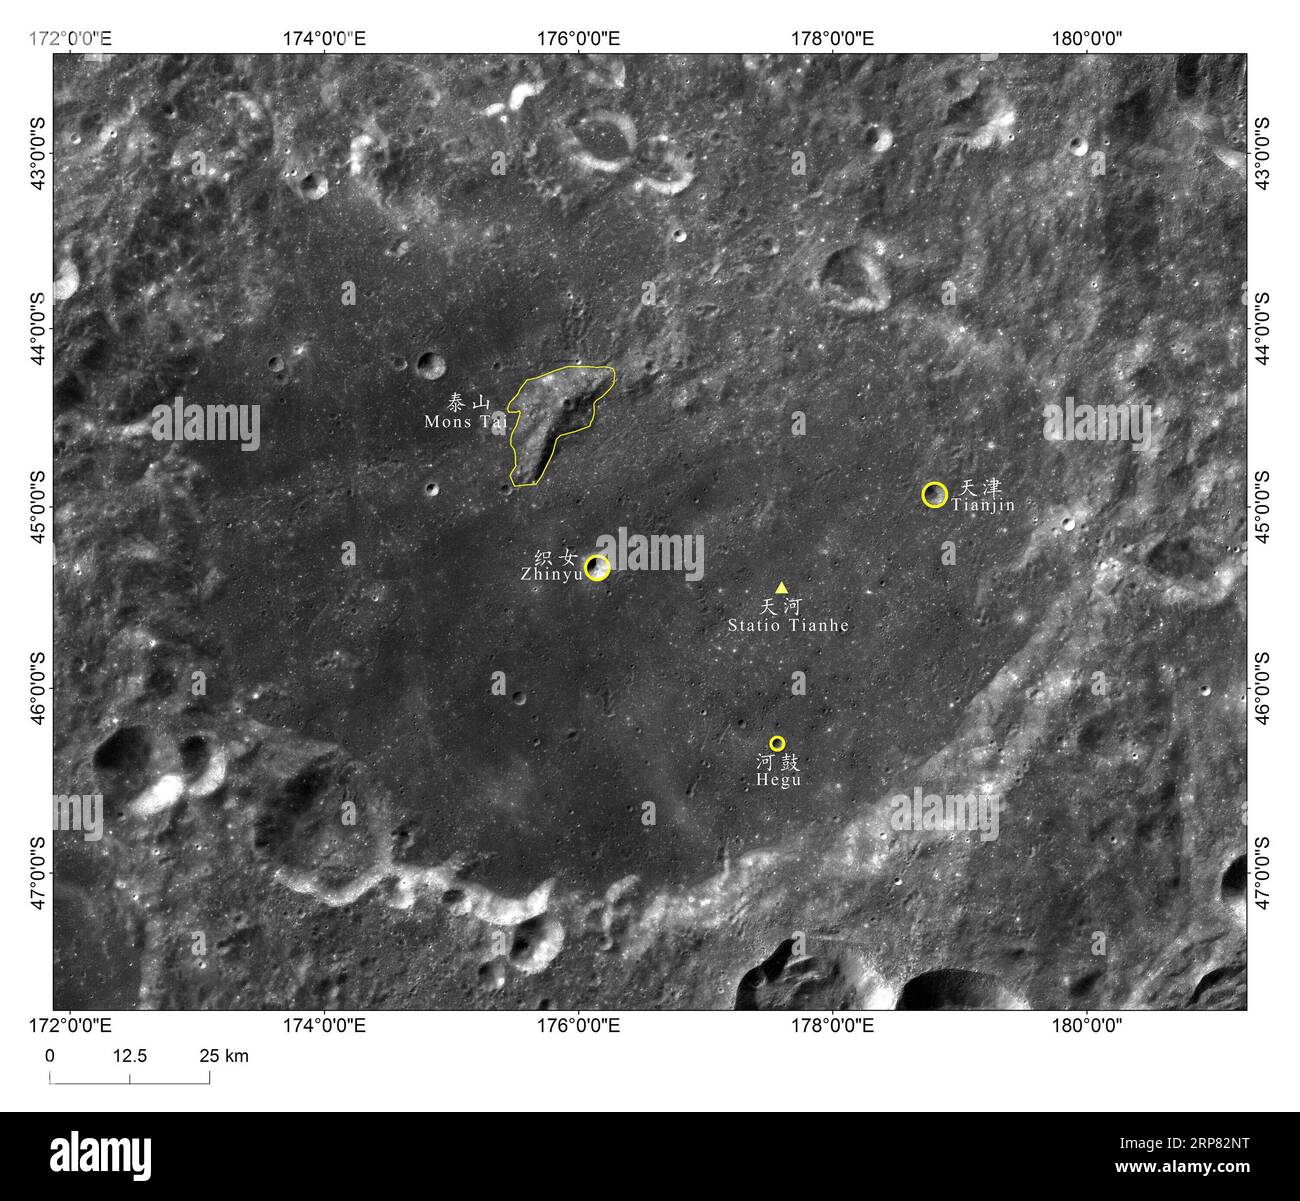 (190216) -- BEIJING, Feb. 16, 2019 (Xinhua) -- Photo provided by the China National Space Administration (CNSA) shows the image of the landing site of China s Chang e-4 lunar probe, Statio Tianhe , surrounded by three nearby impact craters and one hill. The landing site of China s Chang e-4 lunar probe has been named Statio Tianhe after the spacecraft made the first-ever soft landing on the far side of the moon last month. Together with three nearby impact craters and one hill, the name was approved by the International Astronomical Union (IAU), Liu Jizhong, director of the China Lunar Explora Stock Photo